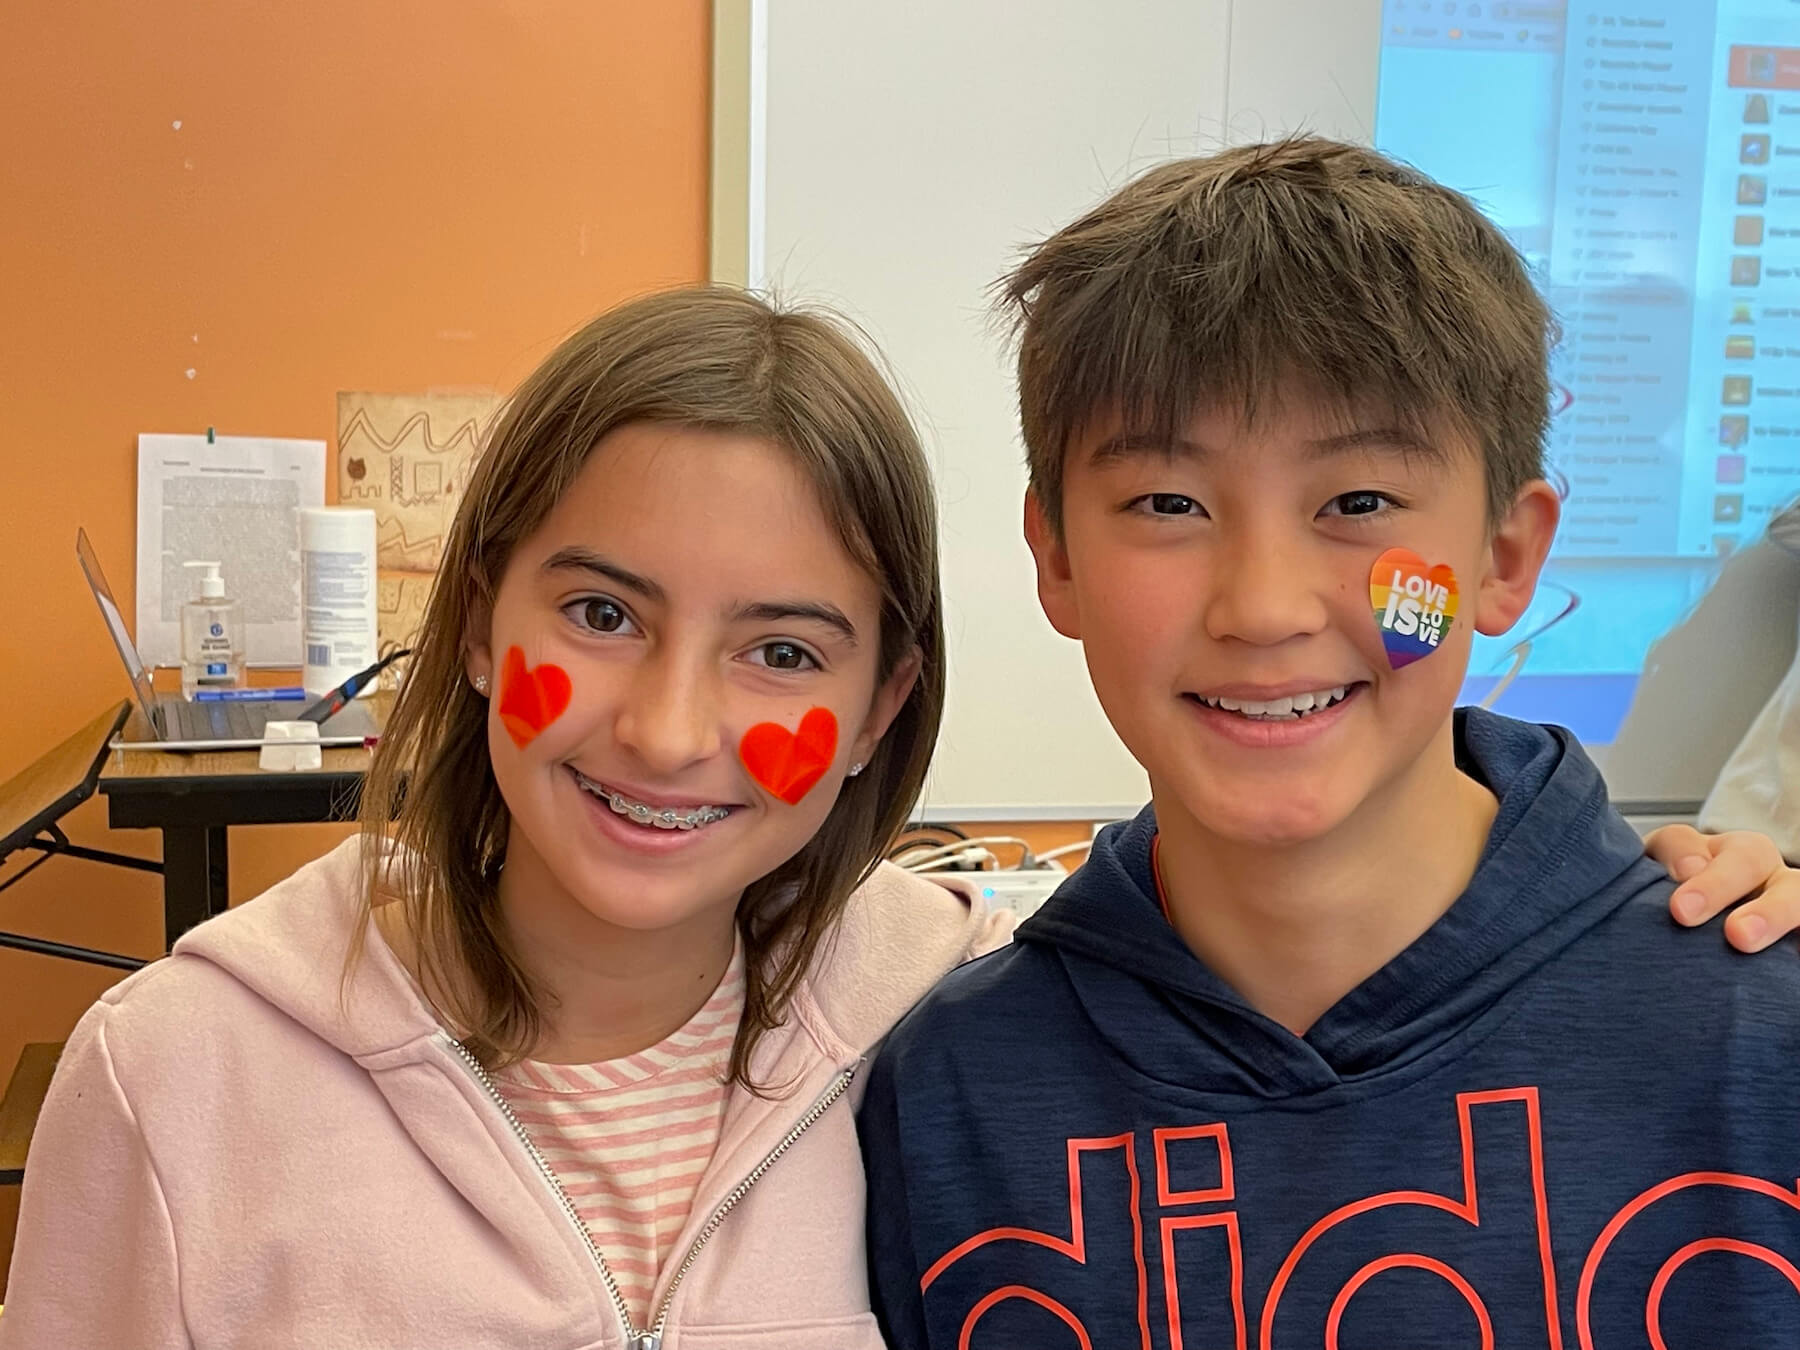 One Fieldston Middle student wearing two heart stickers on her face stands next to a Fieldston Middle student wearing a Love is Love heart sticker on his face.